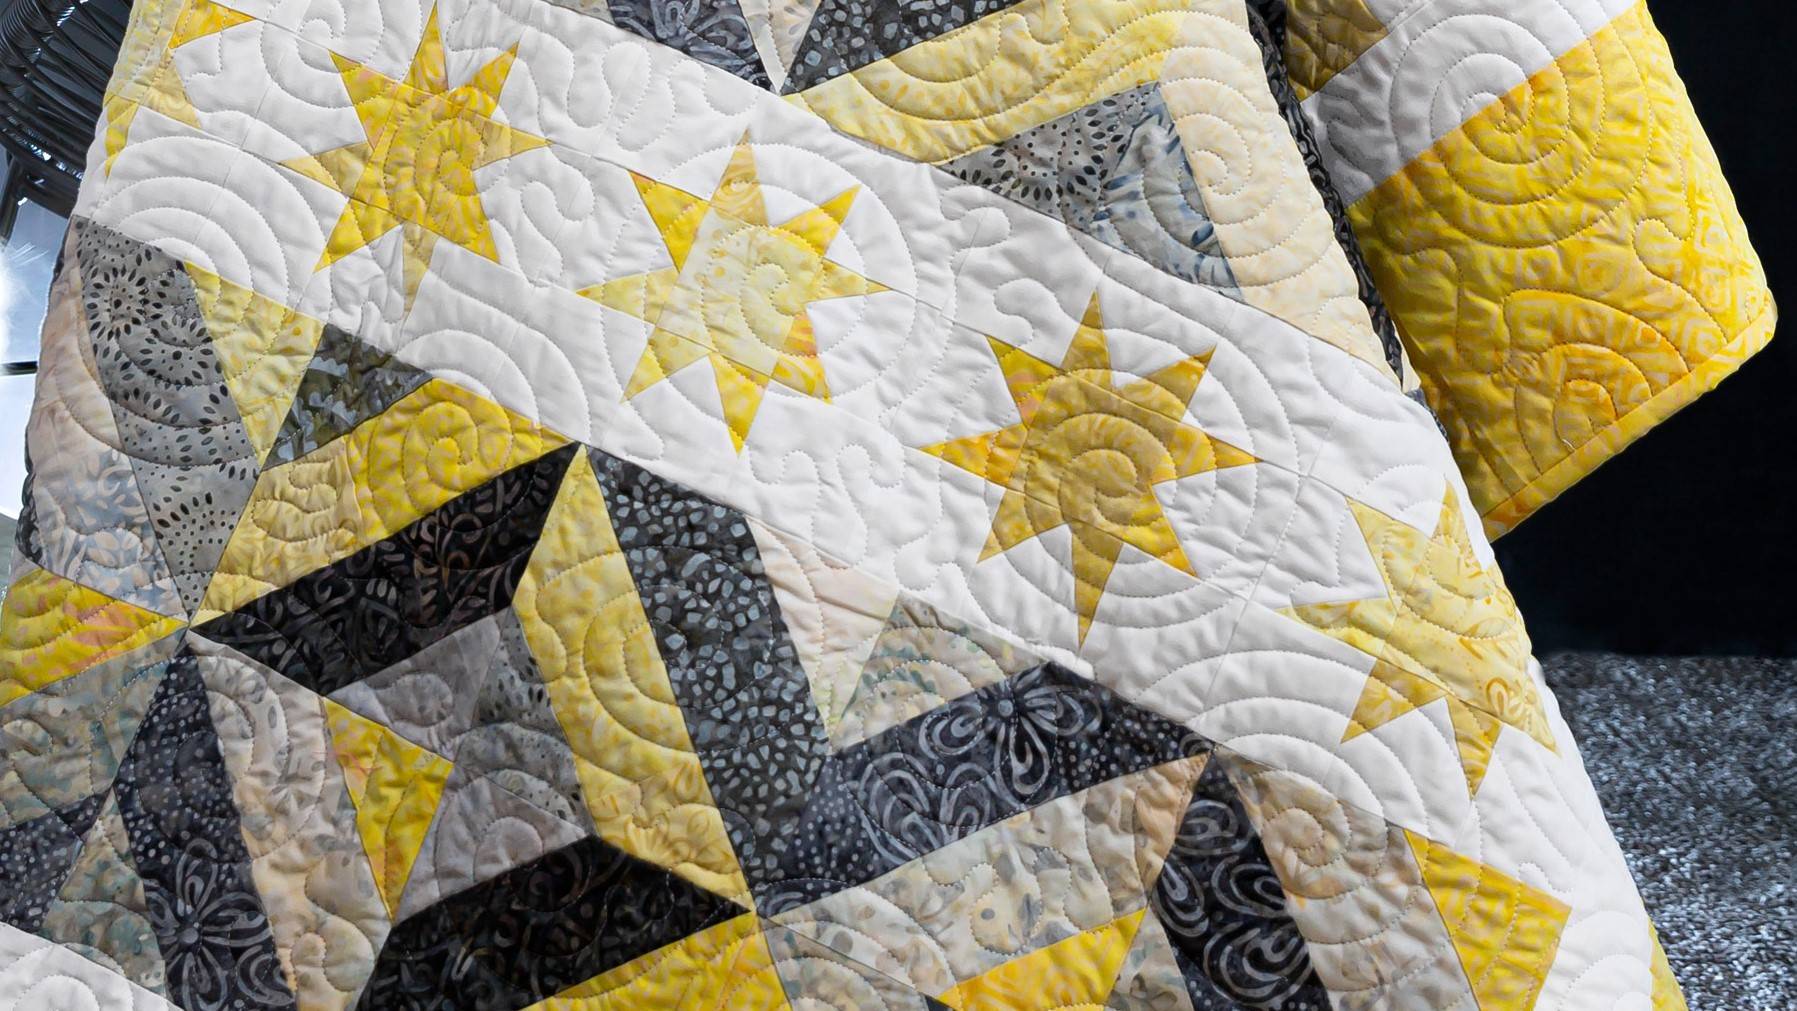 Summer Stars picnic quilt pattern for picnic quilt wedding gift DIY sewing project